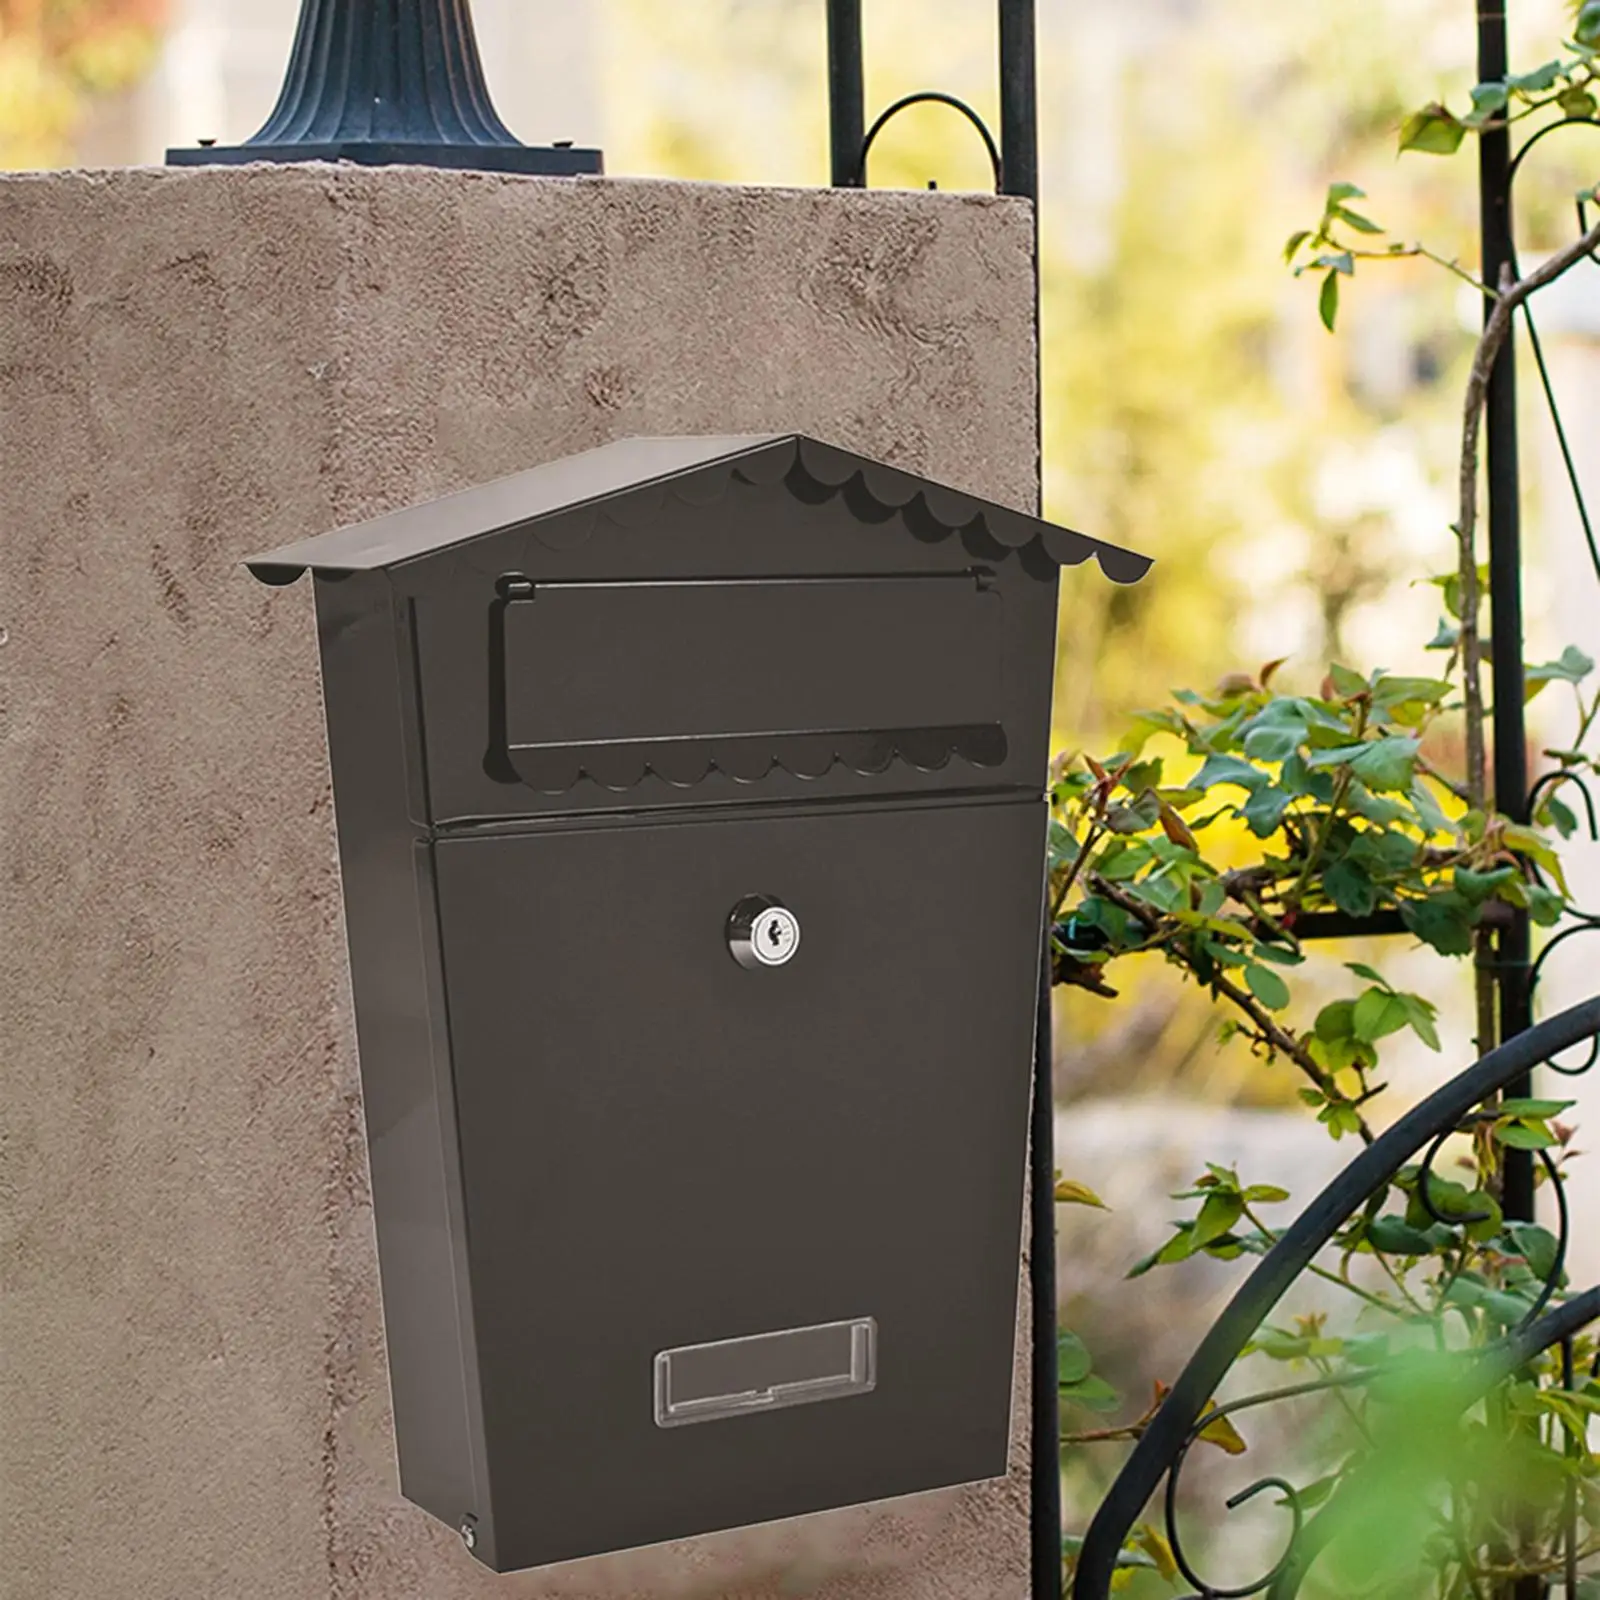 Wall Mount Mailbox Large Capacity Locking Mailboxes with Key Lock Metal Mail Box for Home Decorative